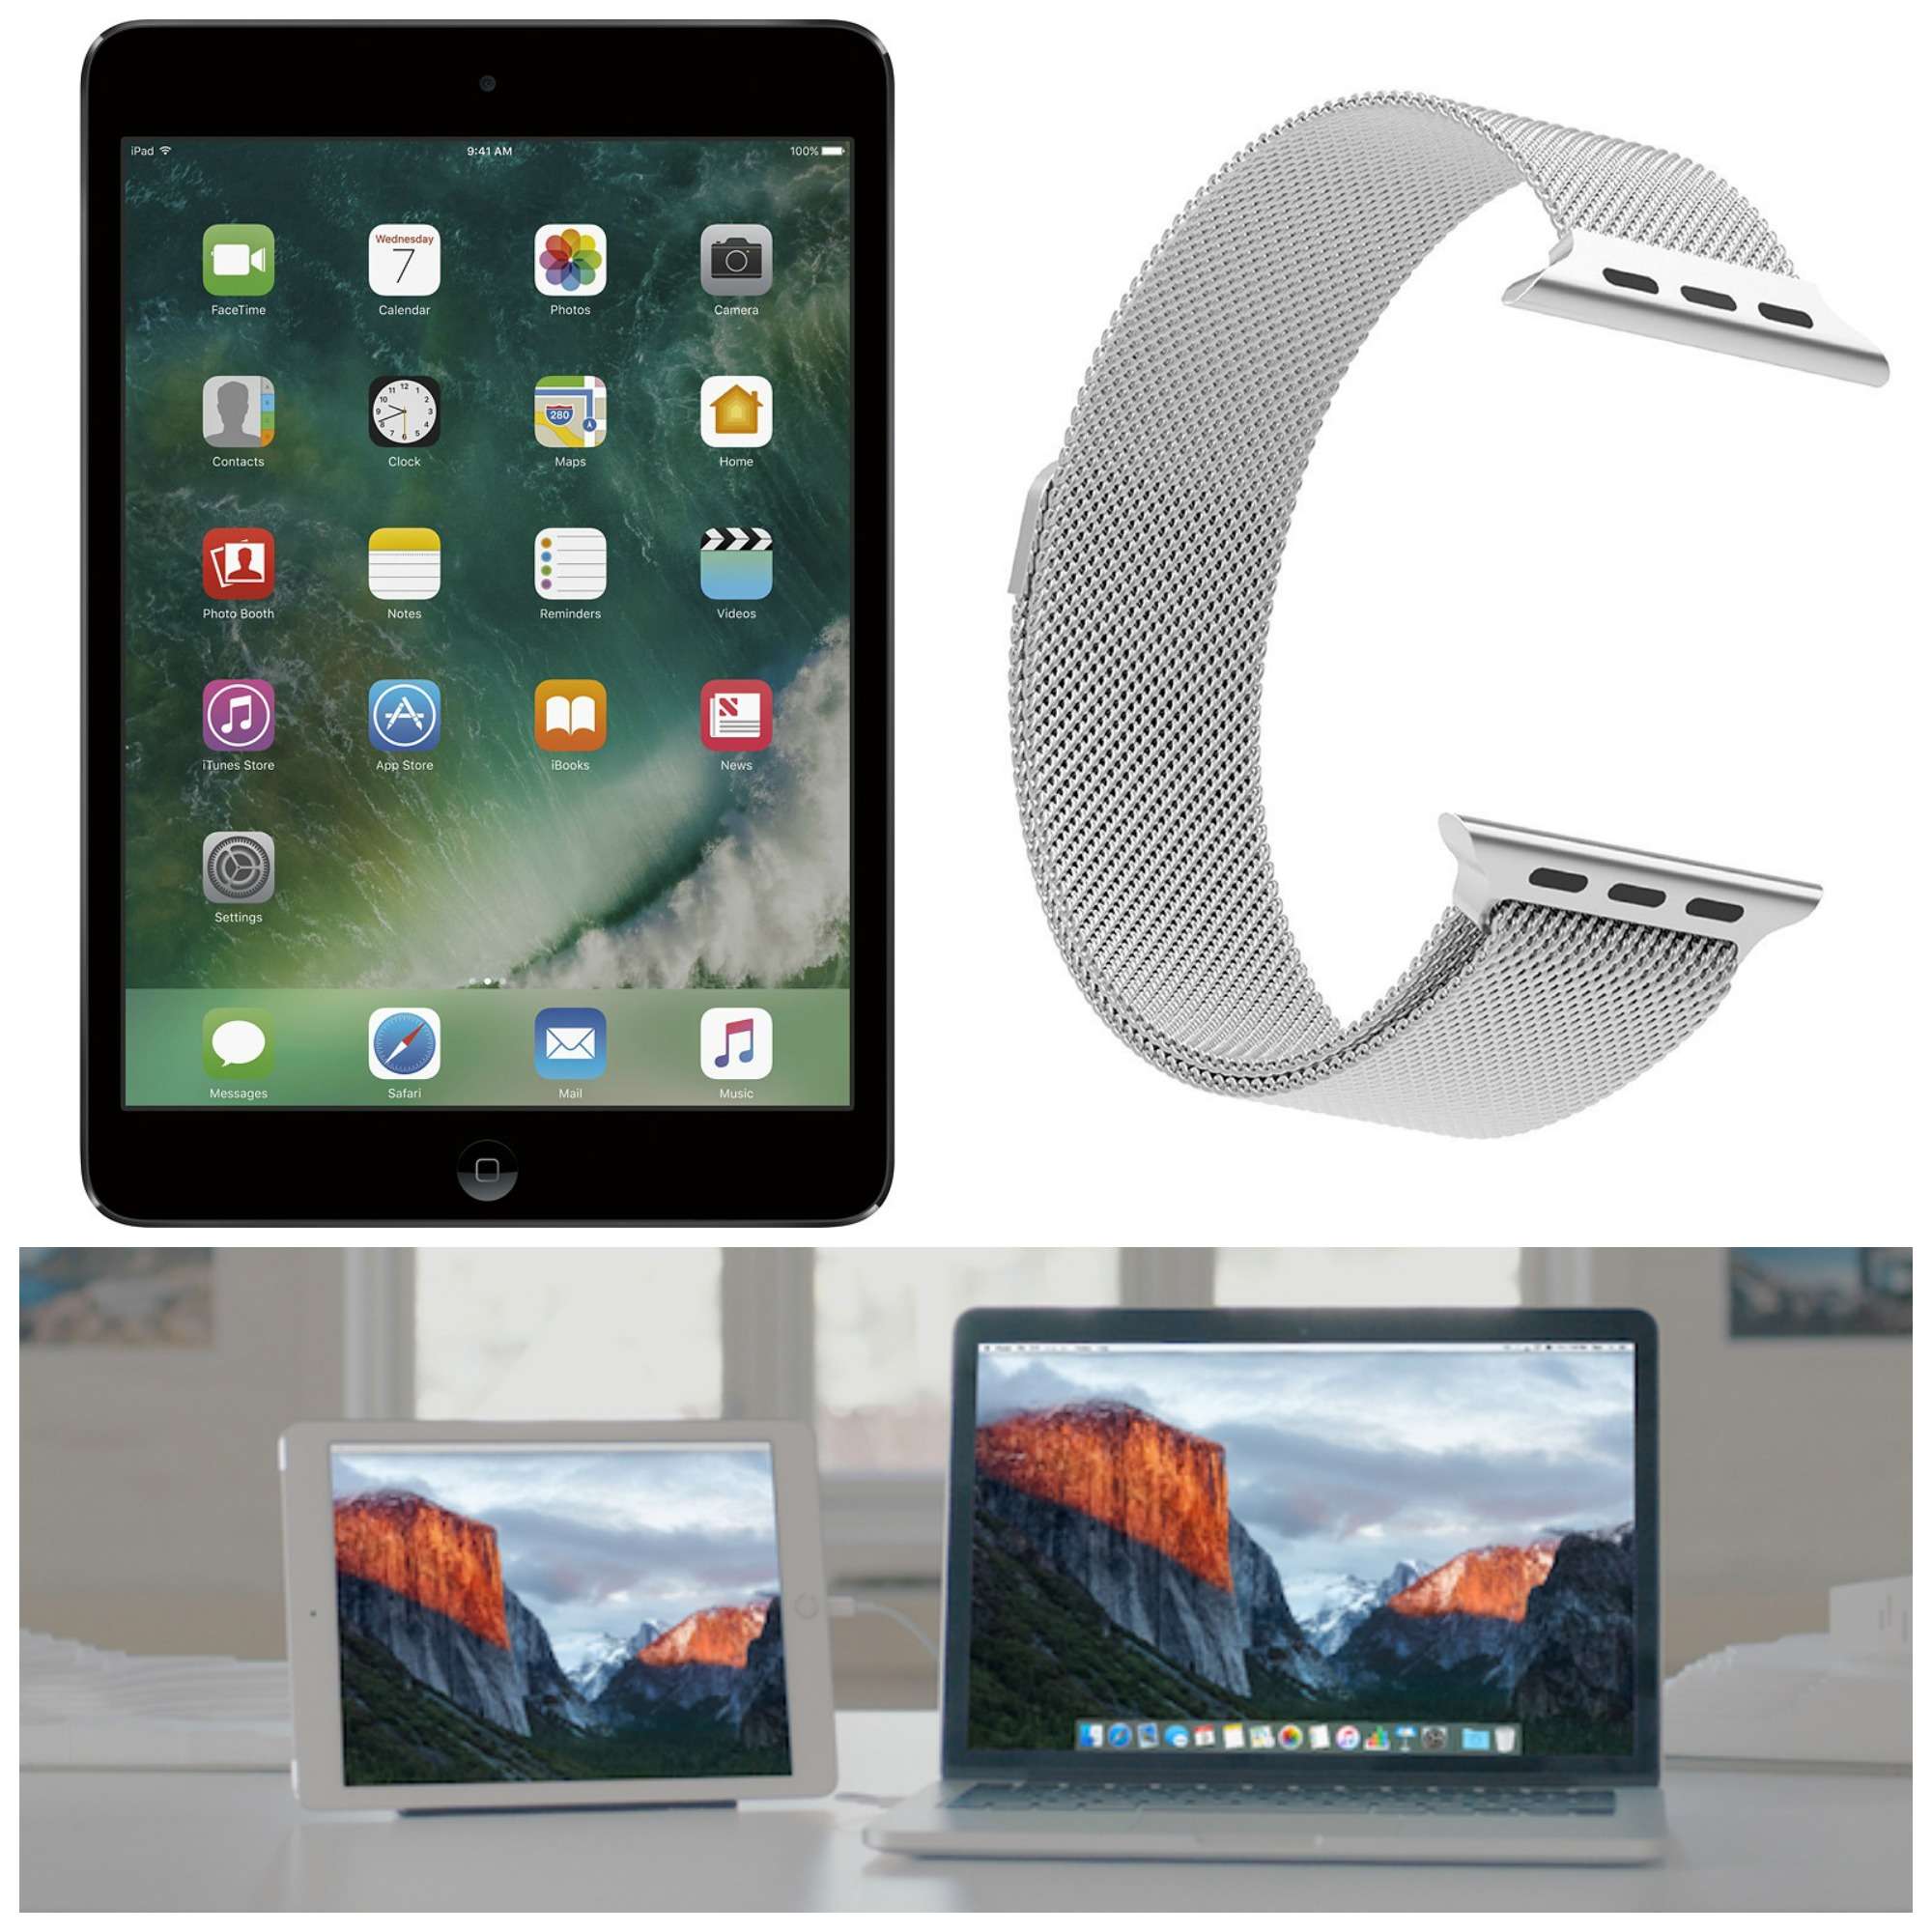 Snag great deals on tiny Apple tablets, a third-party Apple Watch band and an essential iOS app.